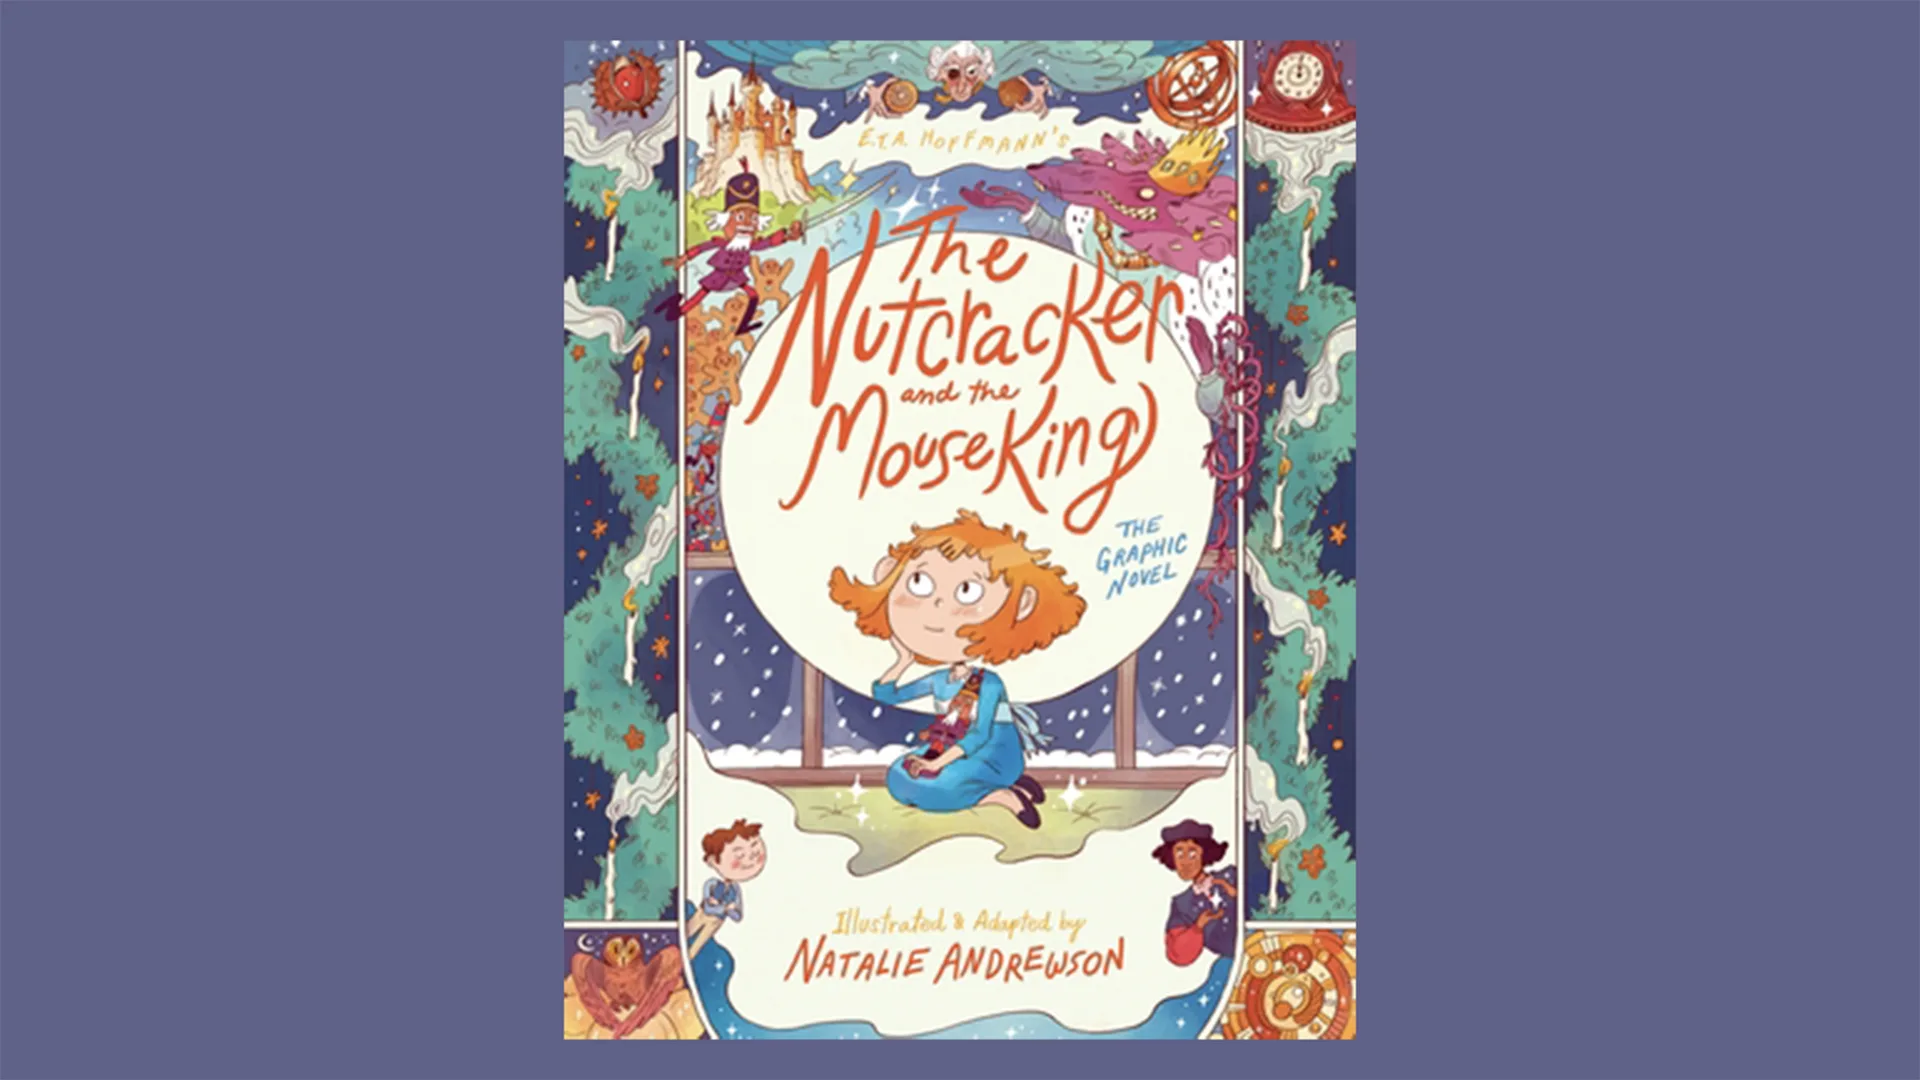 The graphic novel book cover of The Nutcracker and the mouse King